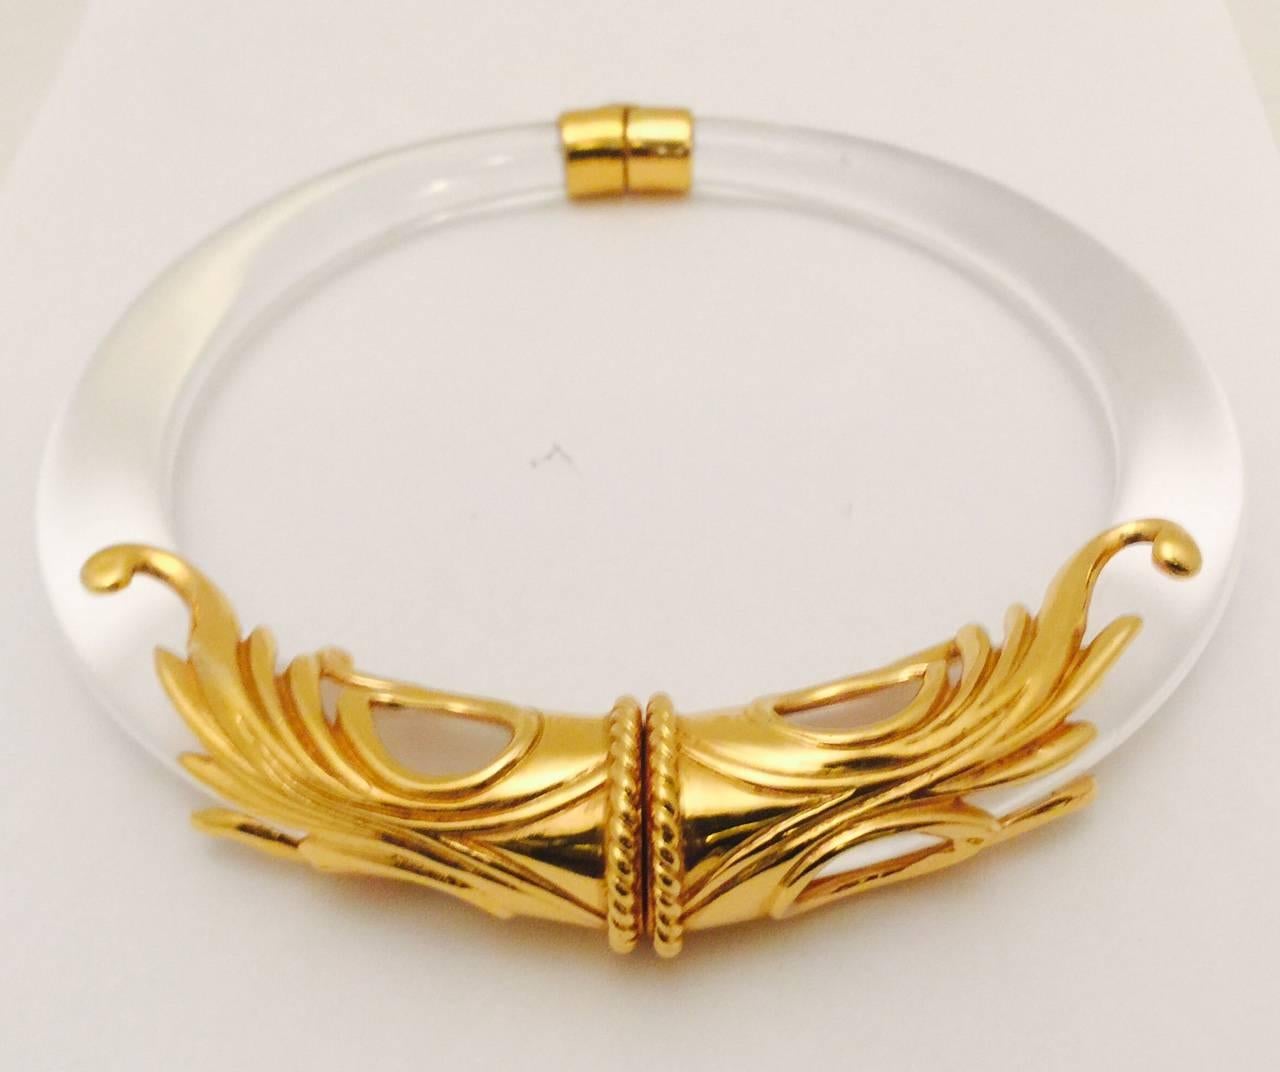 Inna Cytrine Paris has produced incredible lucite jewelry.  From the 1990's, yet modern and totally fashionable!  This 16